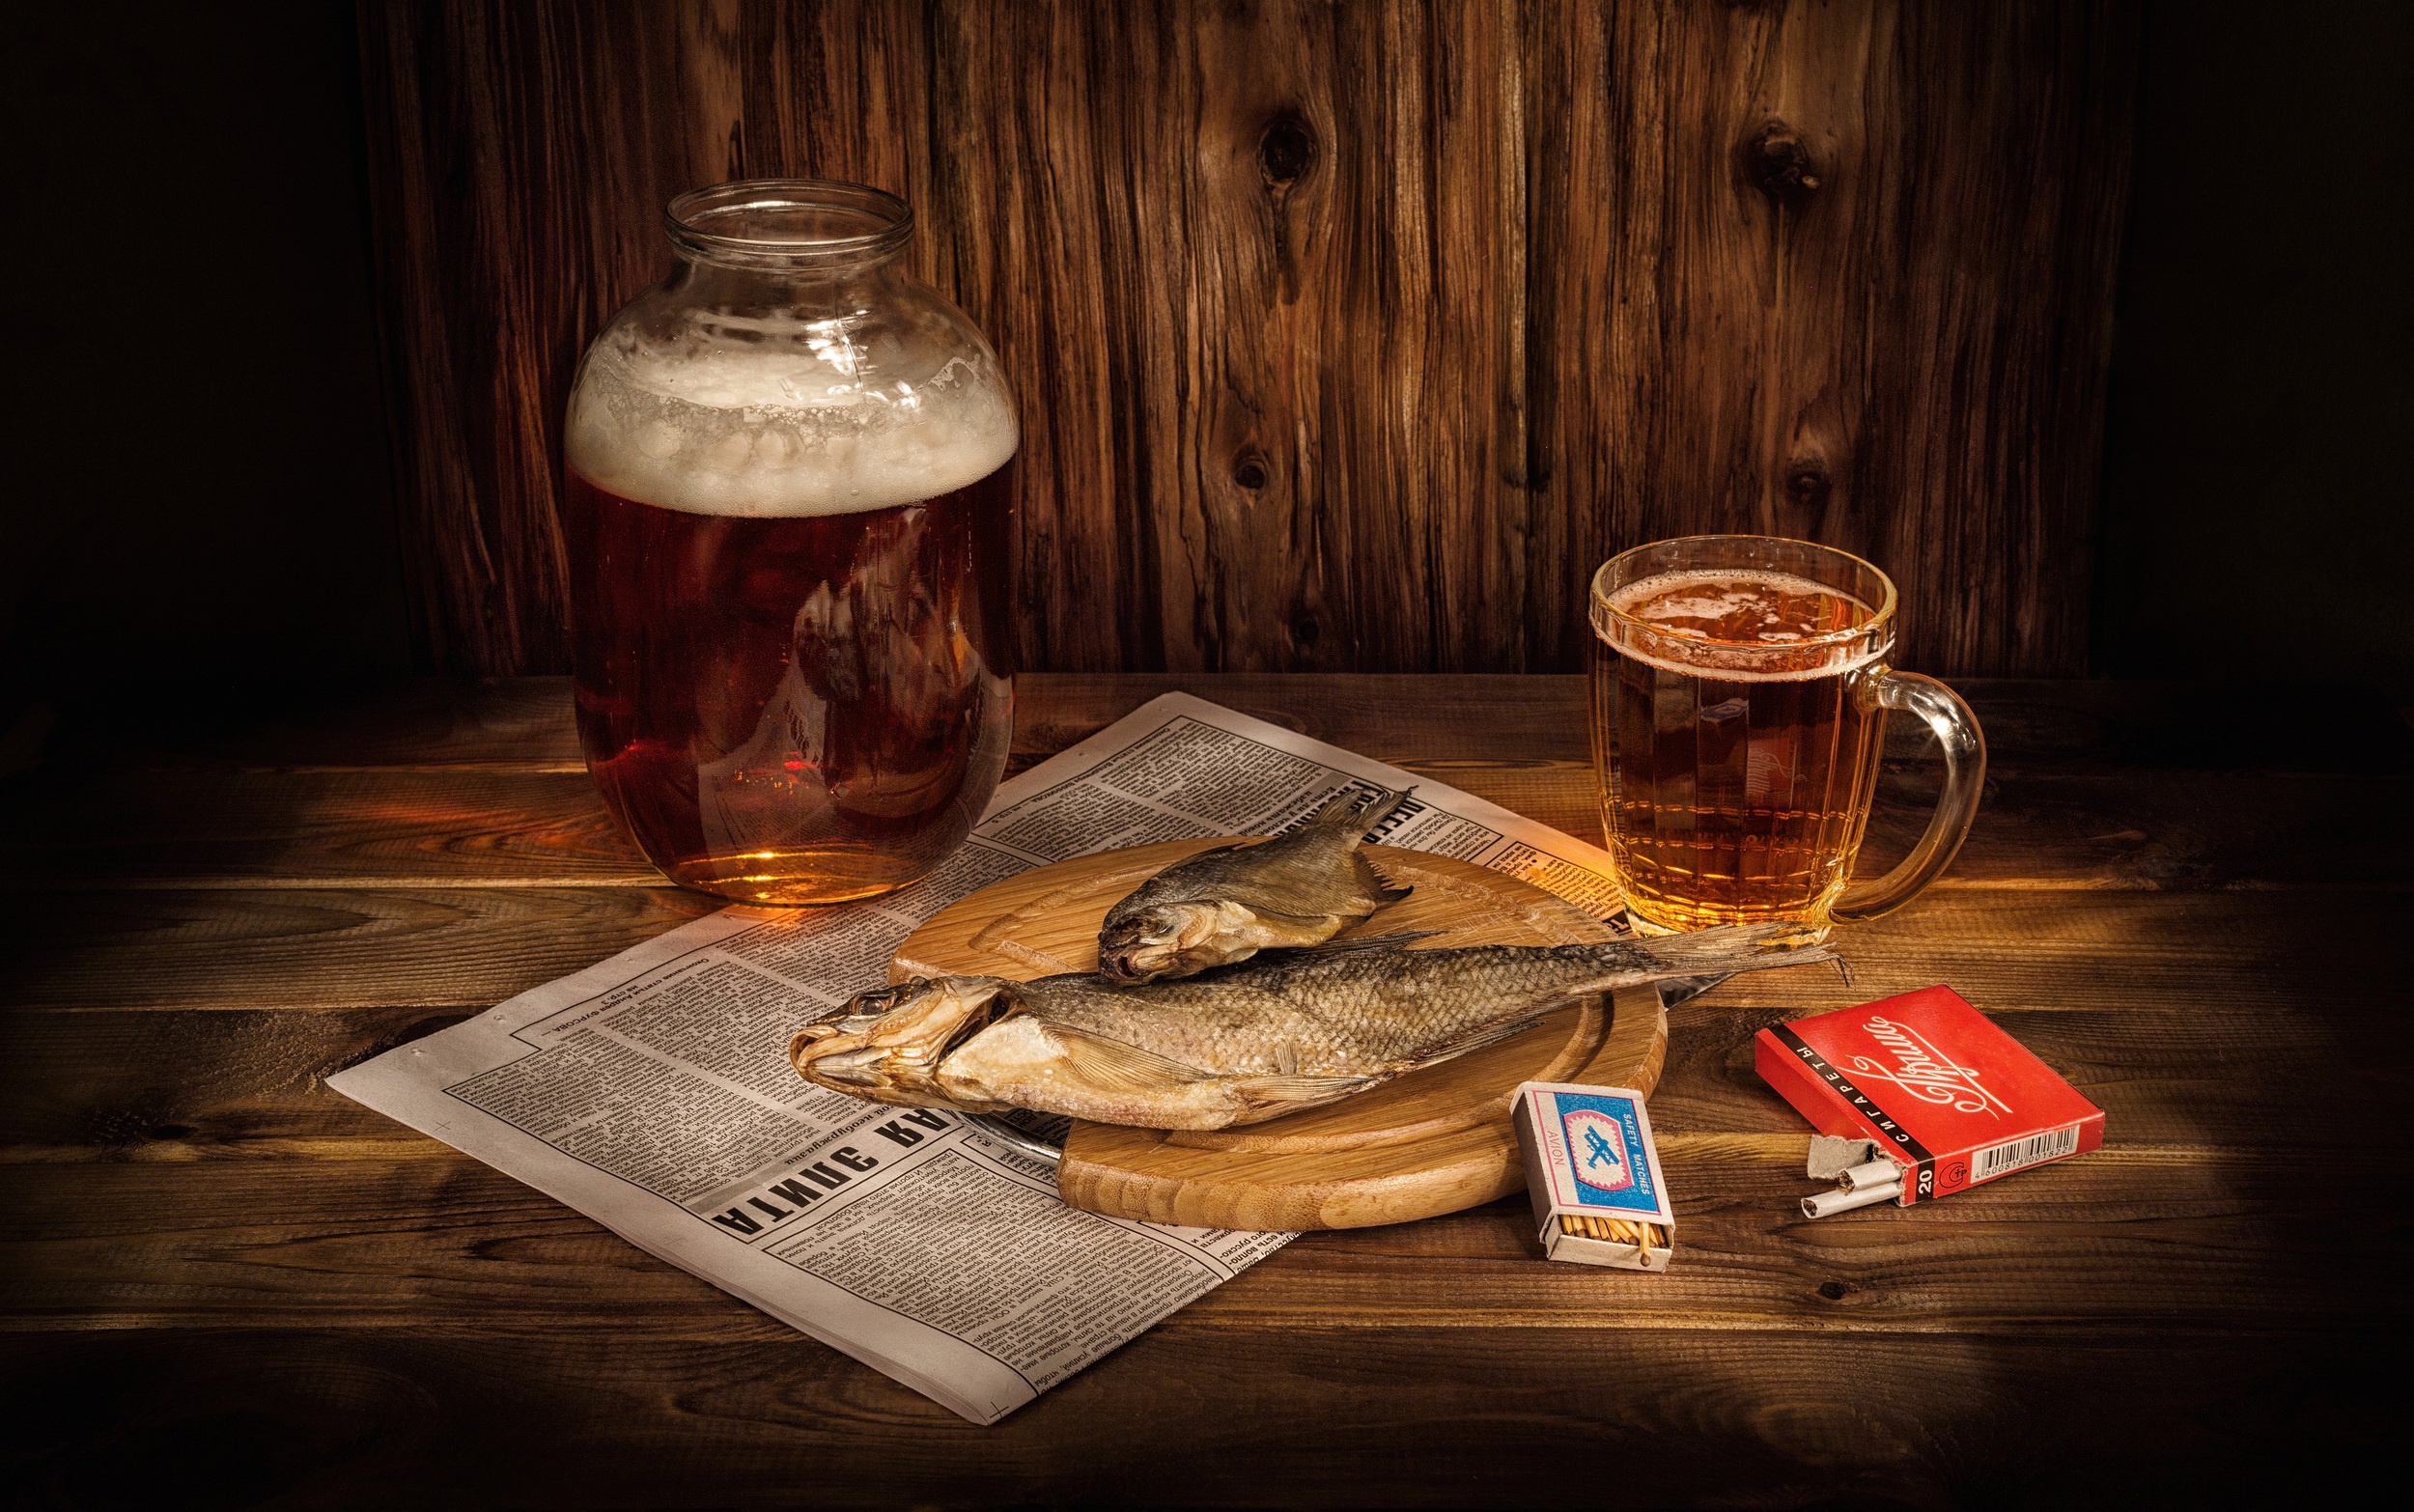 Fish Beer Cigarettes Food Still Life Wood House Newspapers 2500x1566